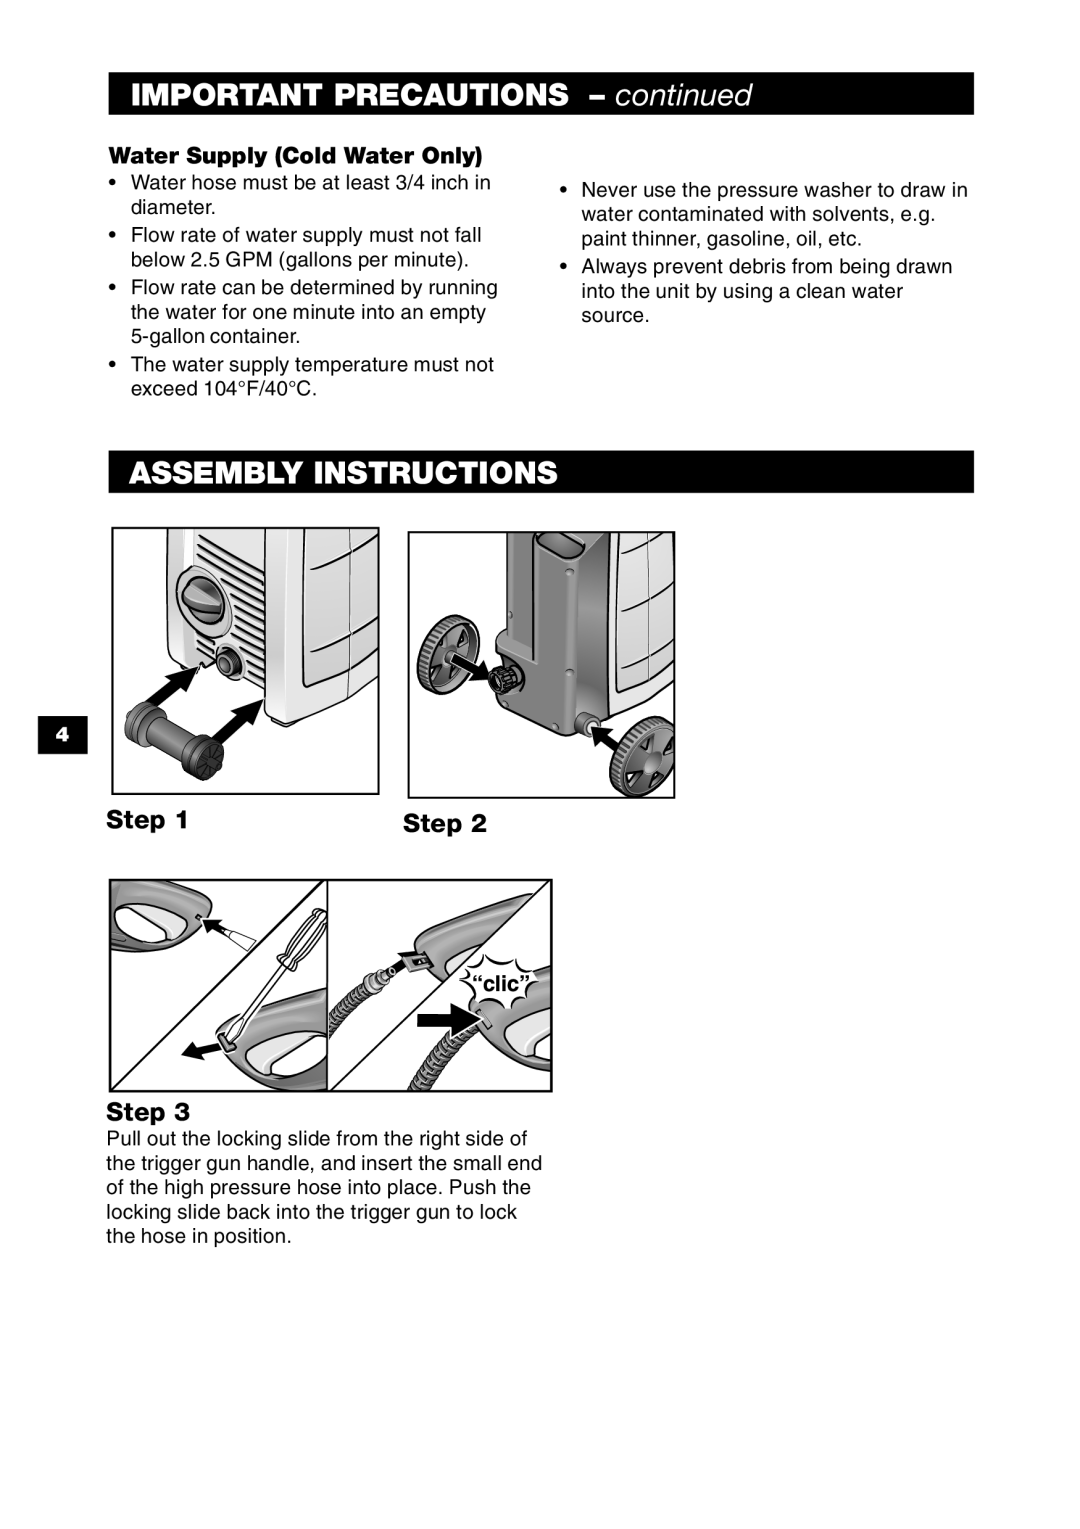 Karcher K 2.90 M IMPORTANT PRECAUTIONS - continued, Assembly Instructions, Step, Water Supply Cold Water Only 